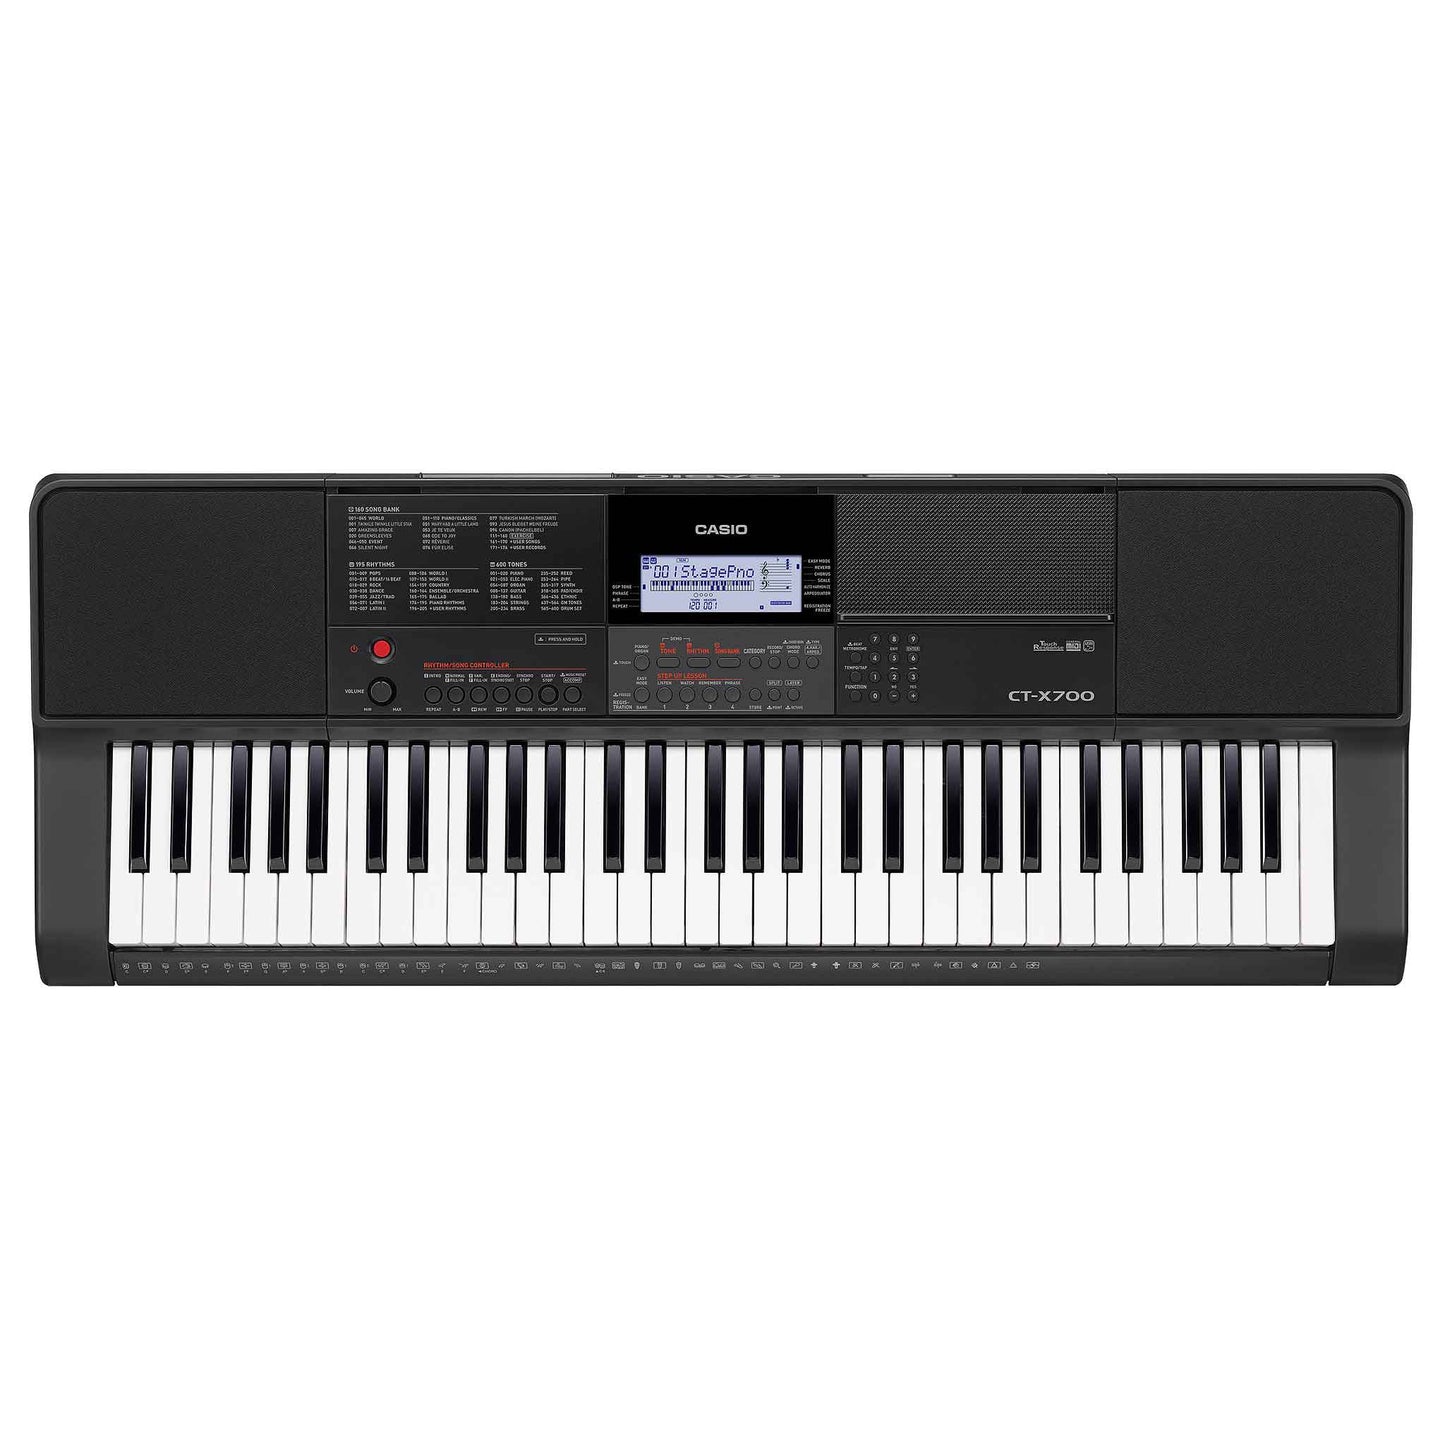 CASIO CTX700 Portable Keyboard With 61-Touch Sensitive Full Size Keys